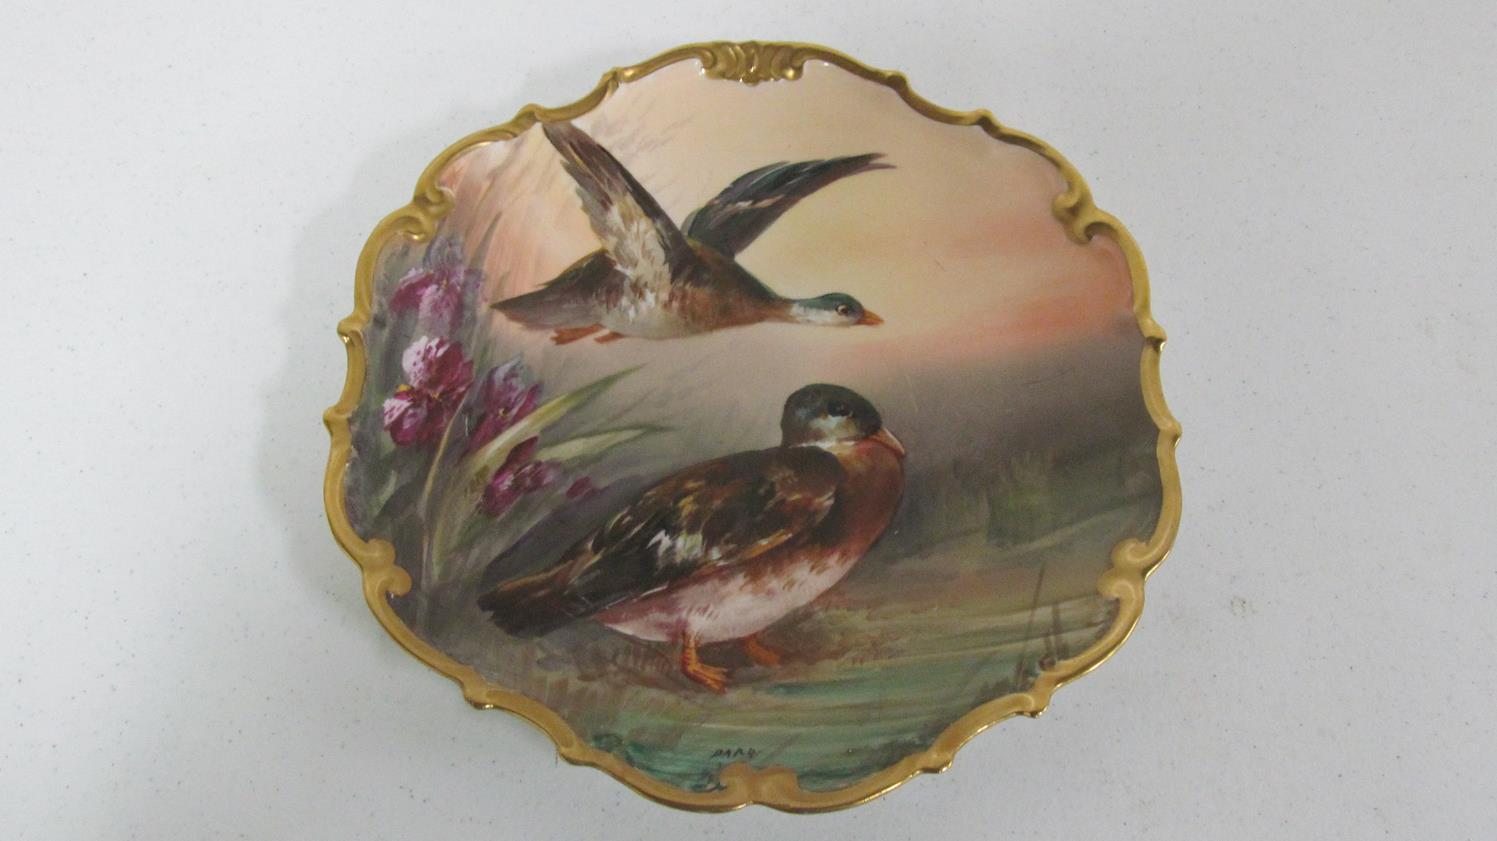 12" Limoges hand painted artist signed (Parr) wall plaque